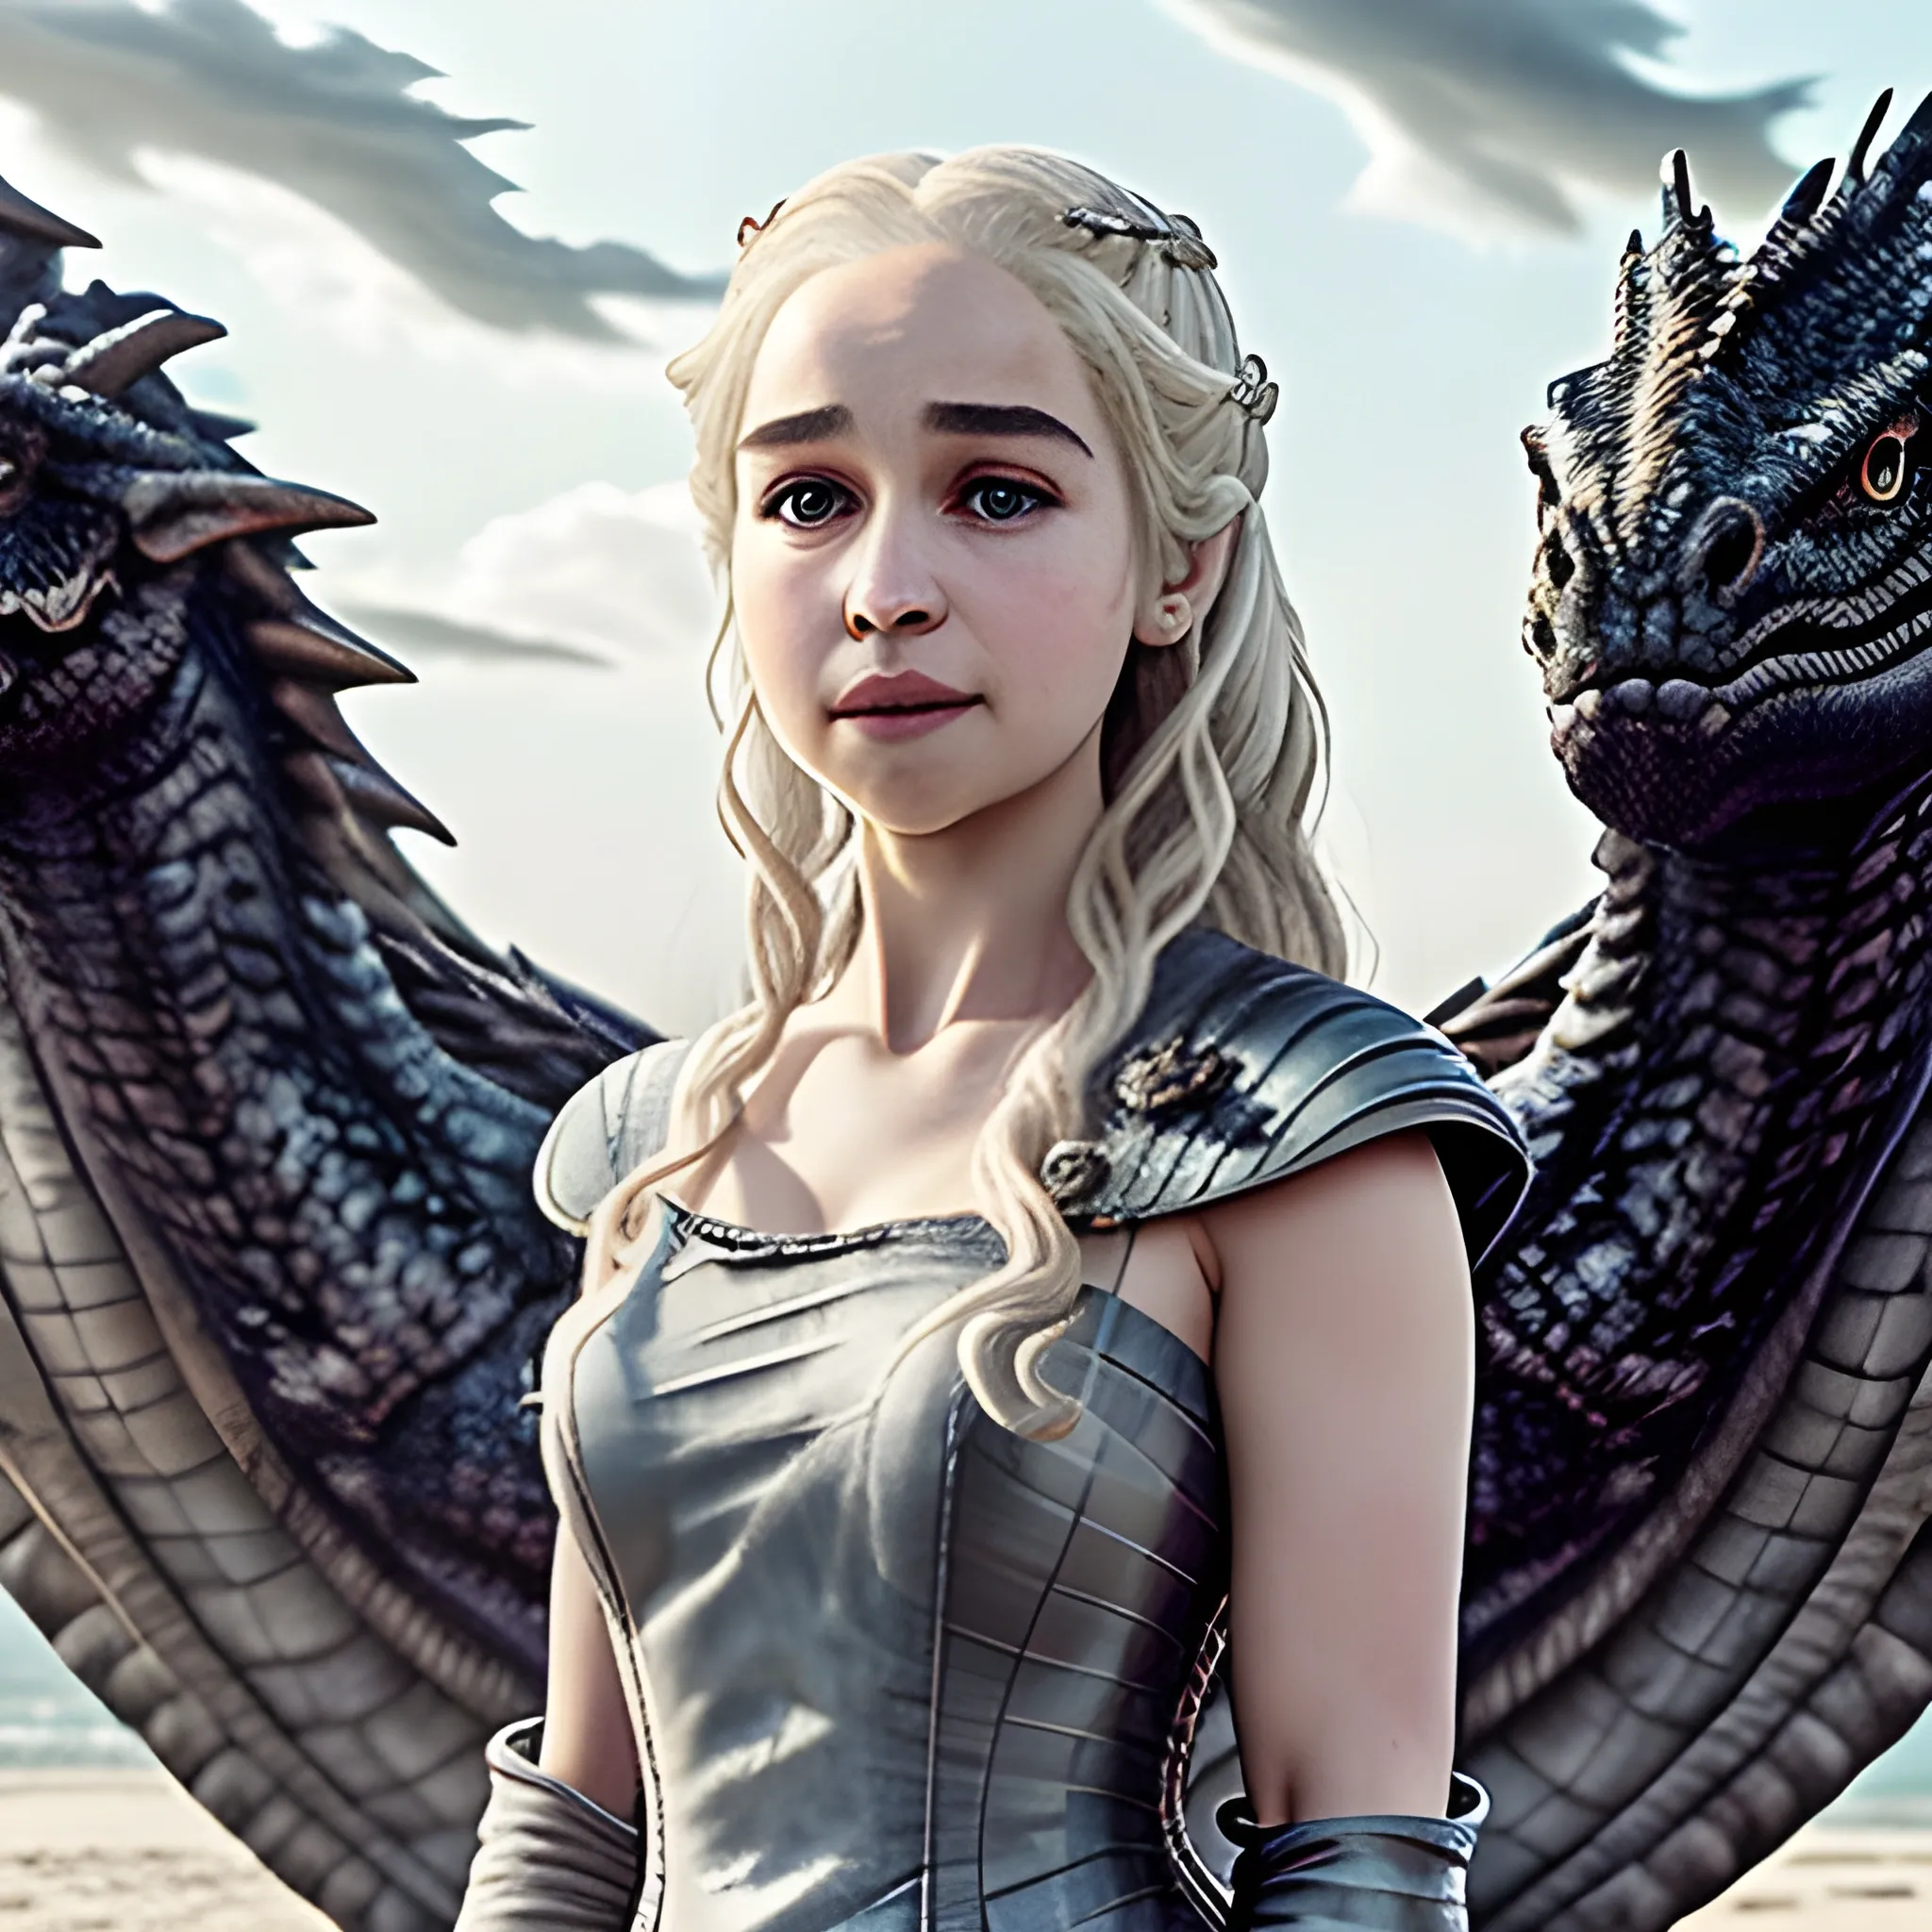 (masterpiece:1.2, best quality), (real picture, intricate details), Daenerys , solo, upper body, casual, light long hair, minimal makeup, natural fabrics, close-up face, smile, home, three background dragons Flying in the sky